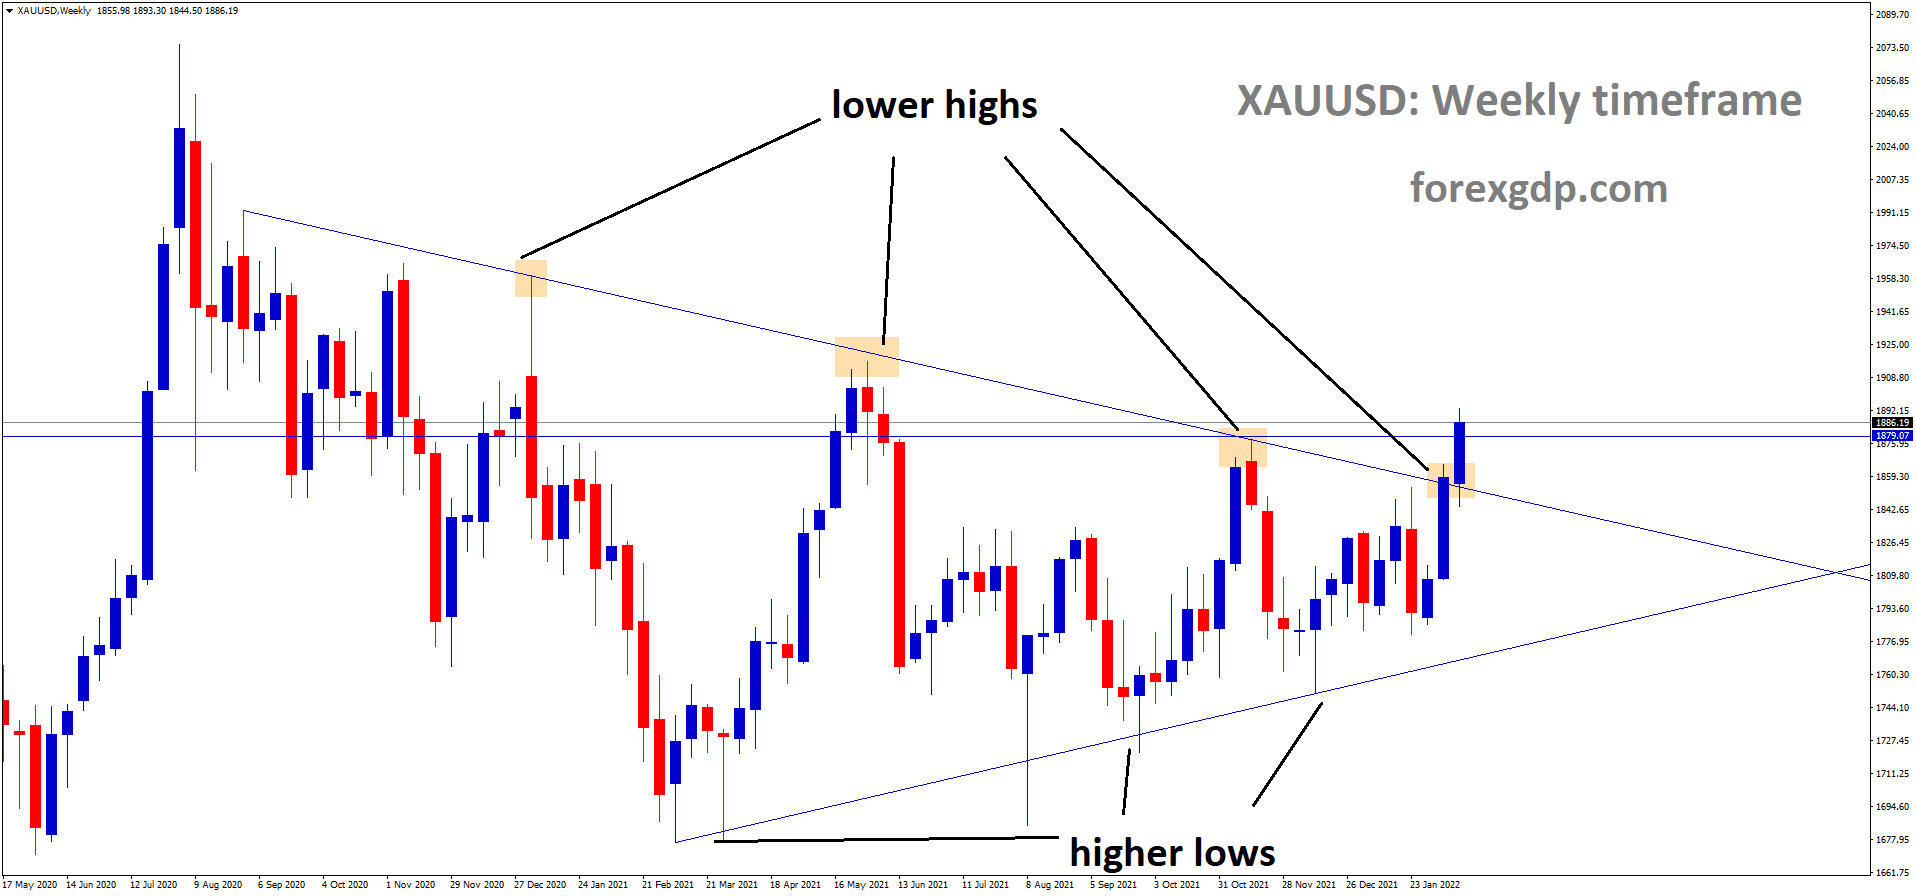 XAUUSD Gold price has reached the Resistance and Top area of the Symmetrical triangle pattern.